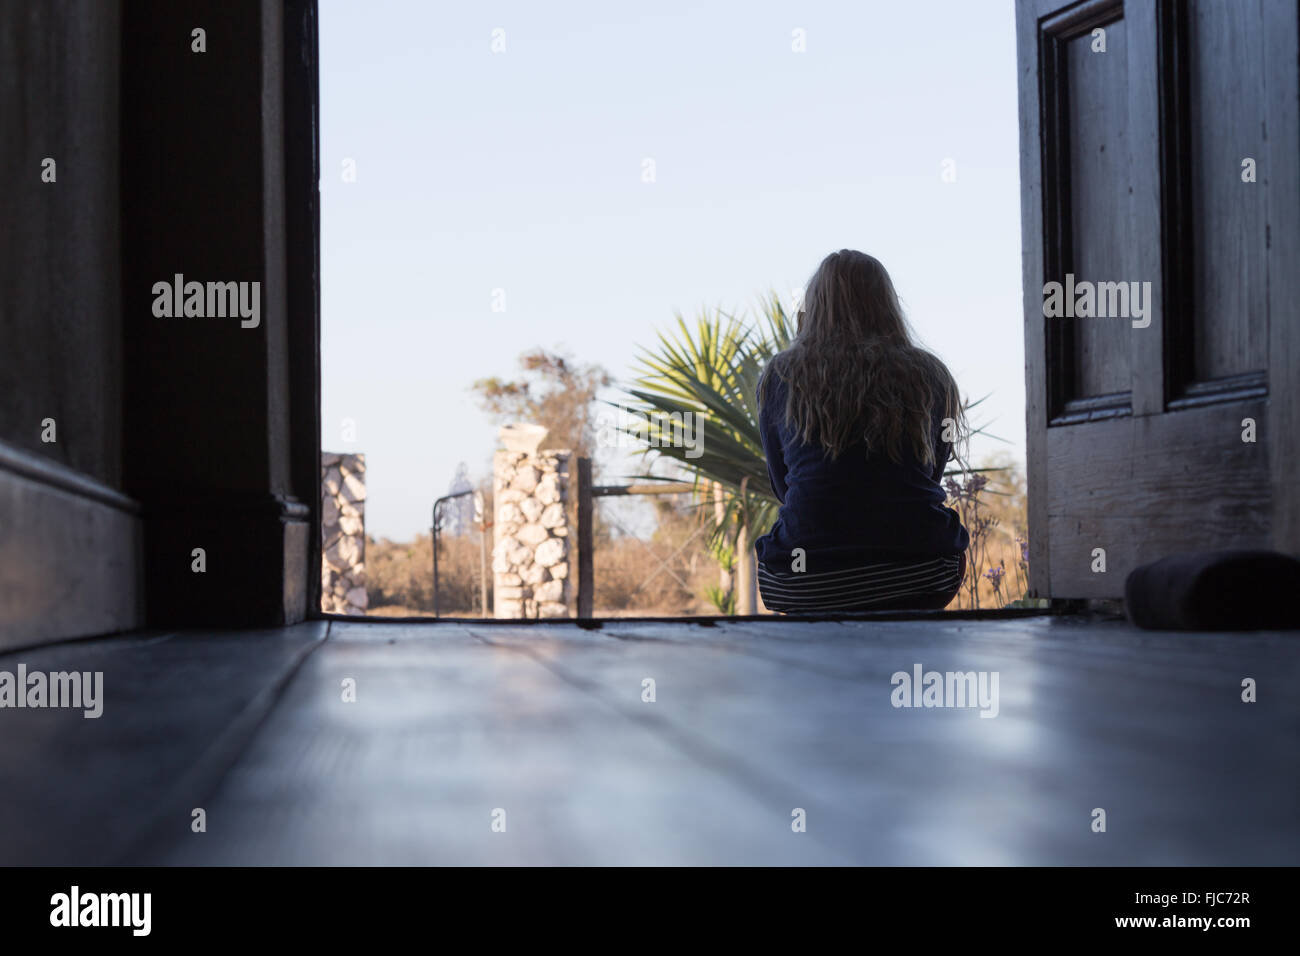 A young woman sits reflecting in the open doorway of an old house looking outside. Stock Photo